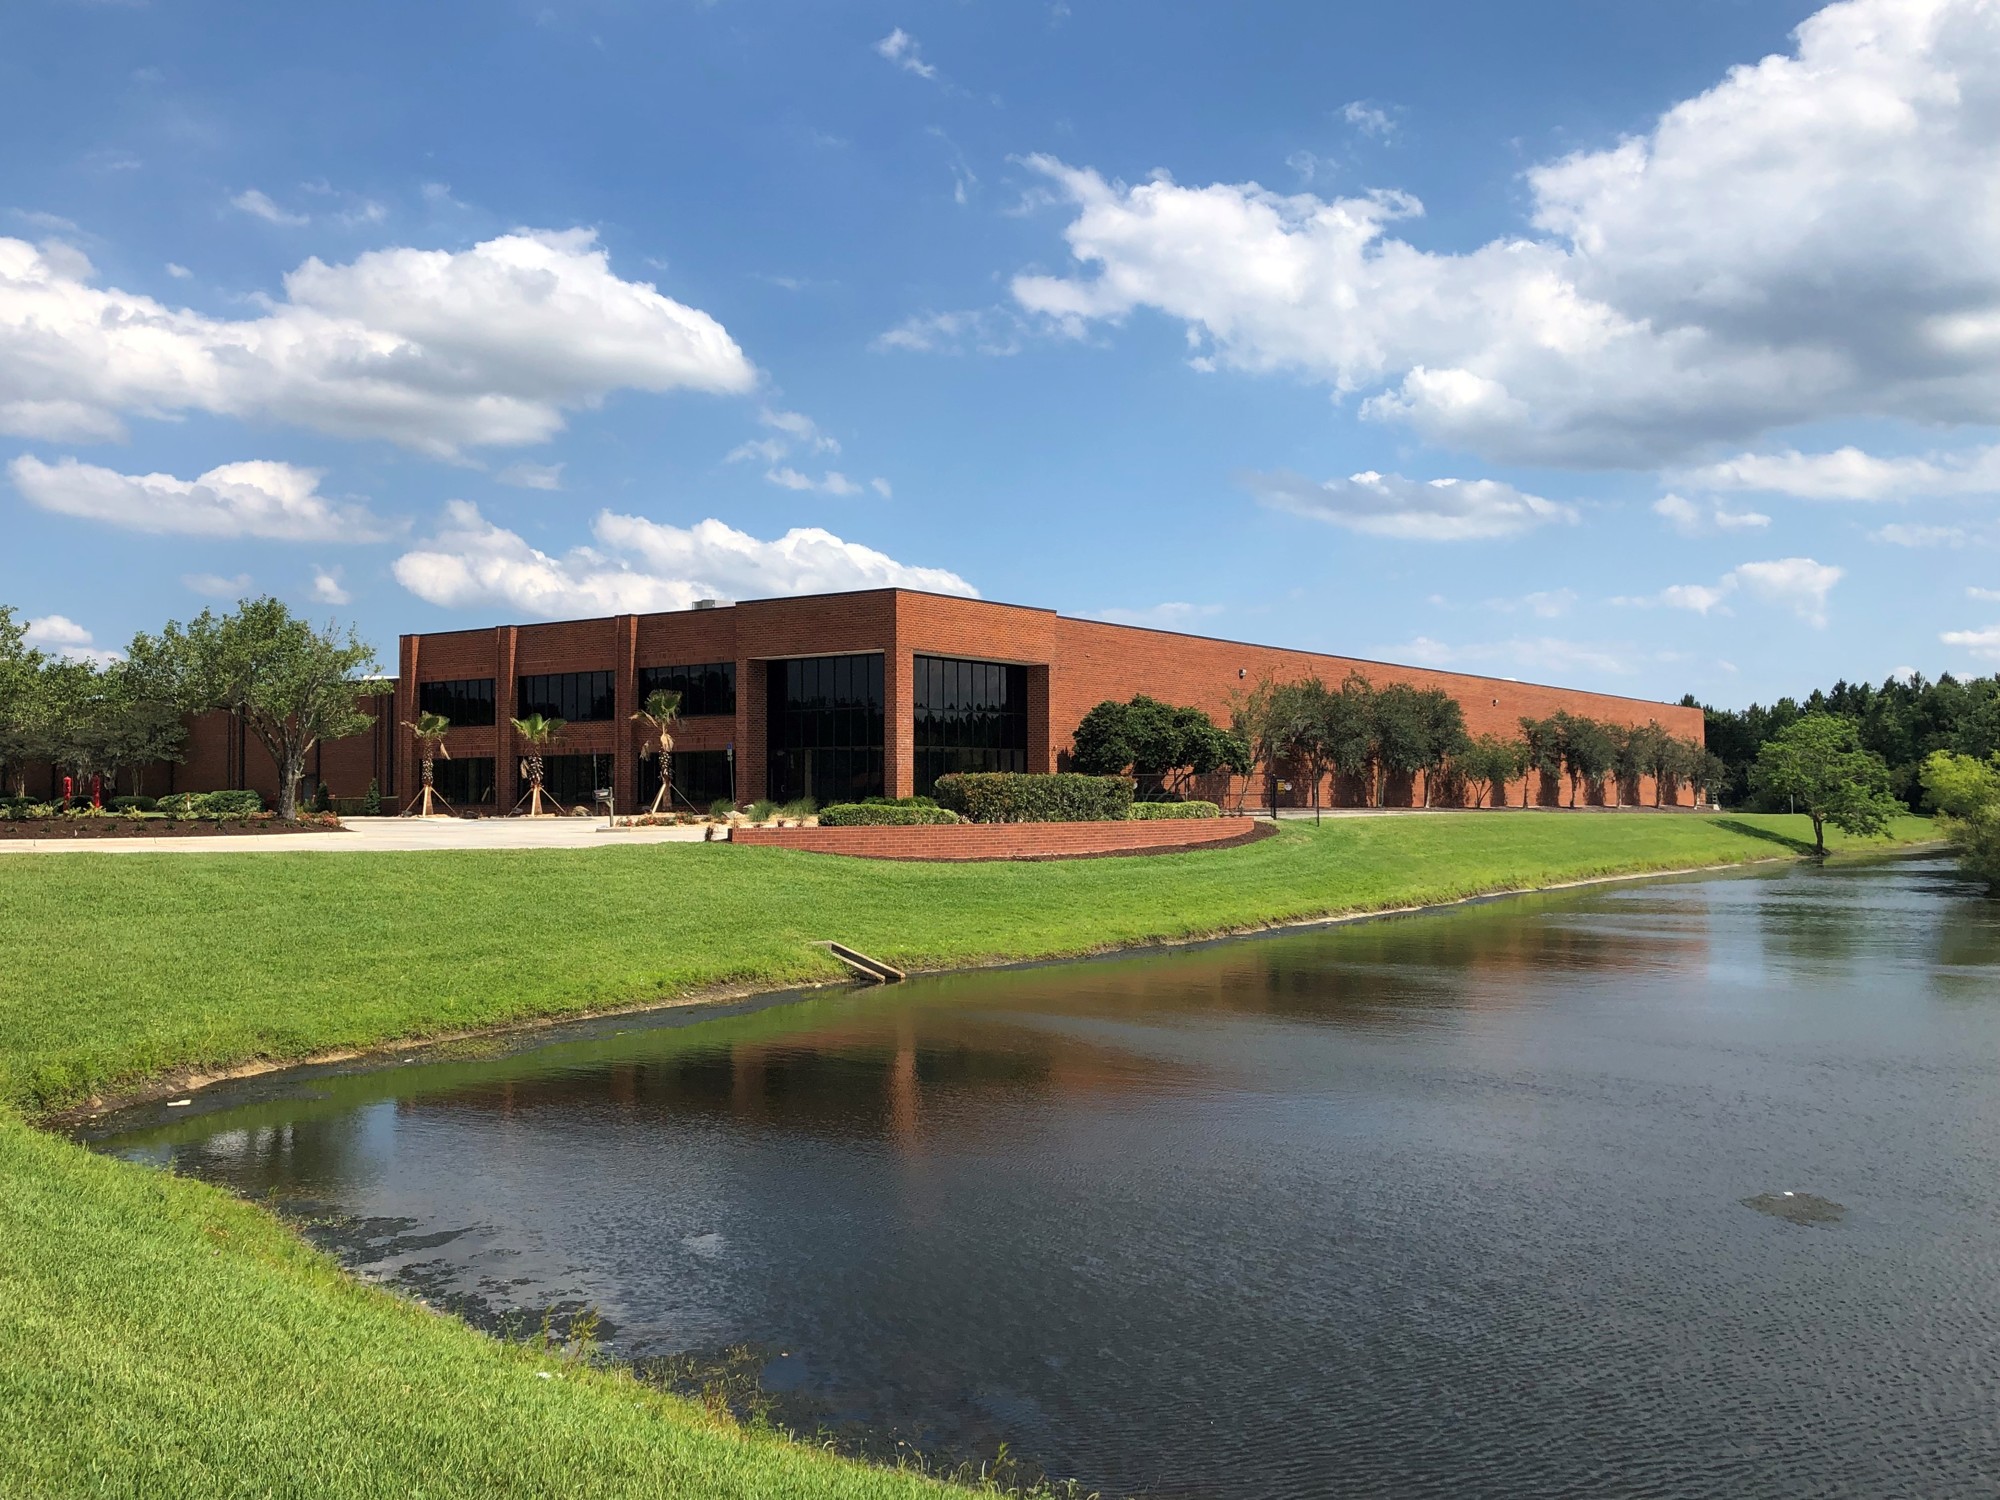 Safari Ltd. will lease a 130,746-square-foot building at 8010 Westside Industrial Drive in Westside Industrial Park.